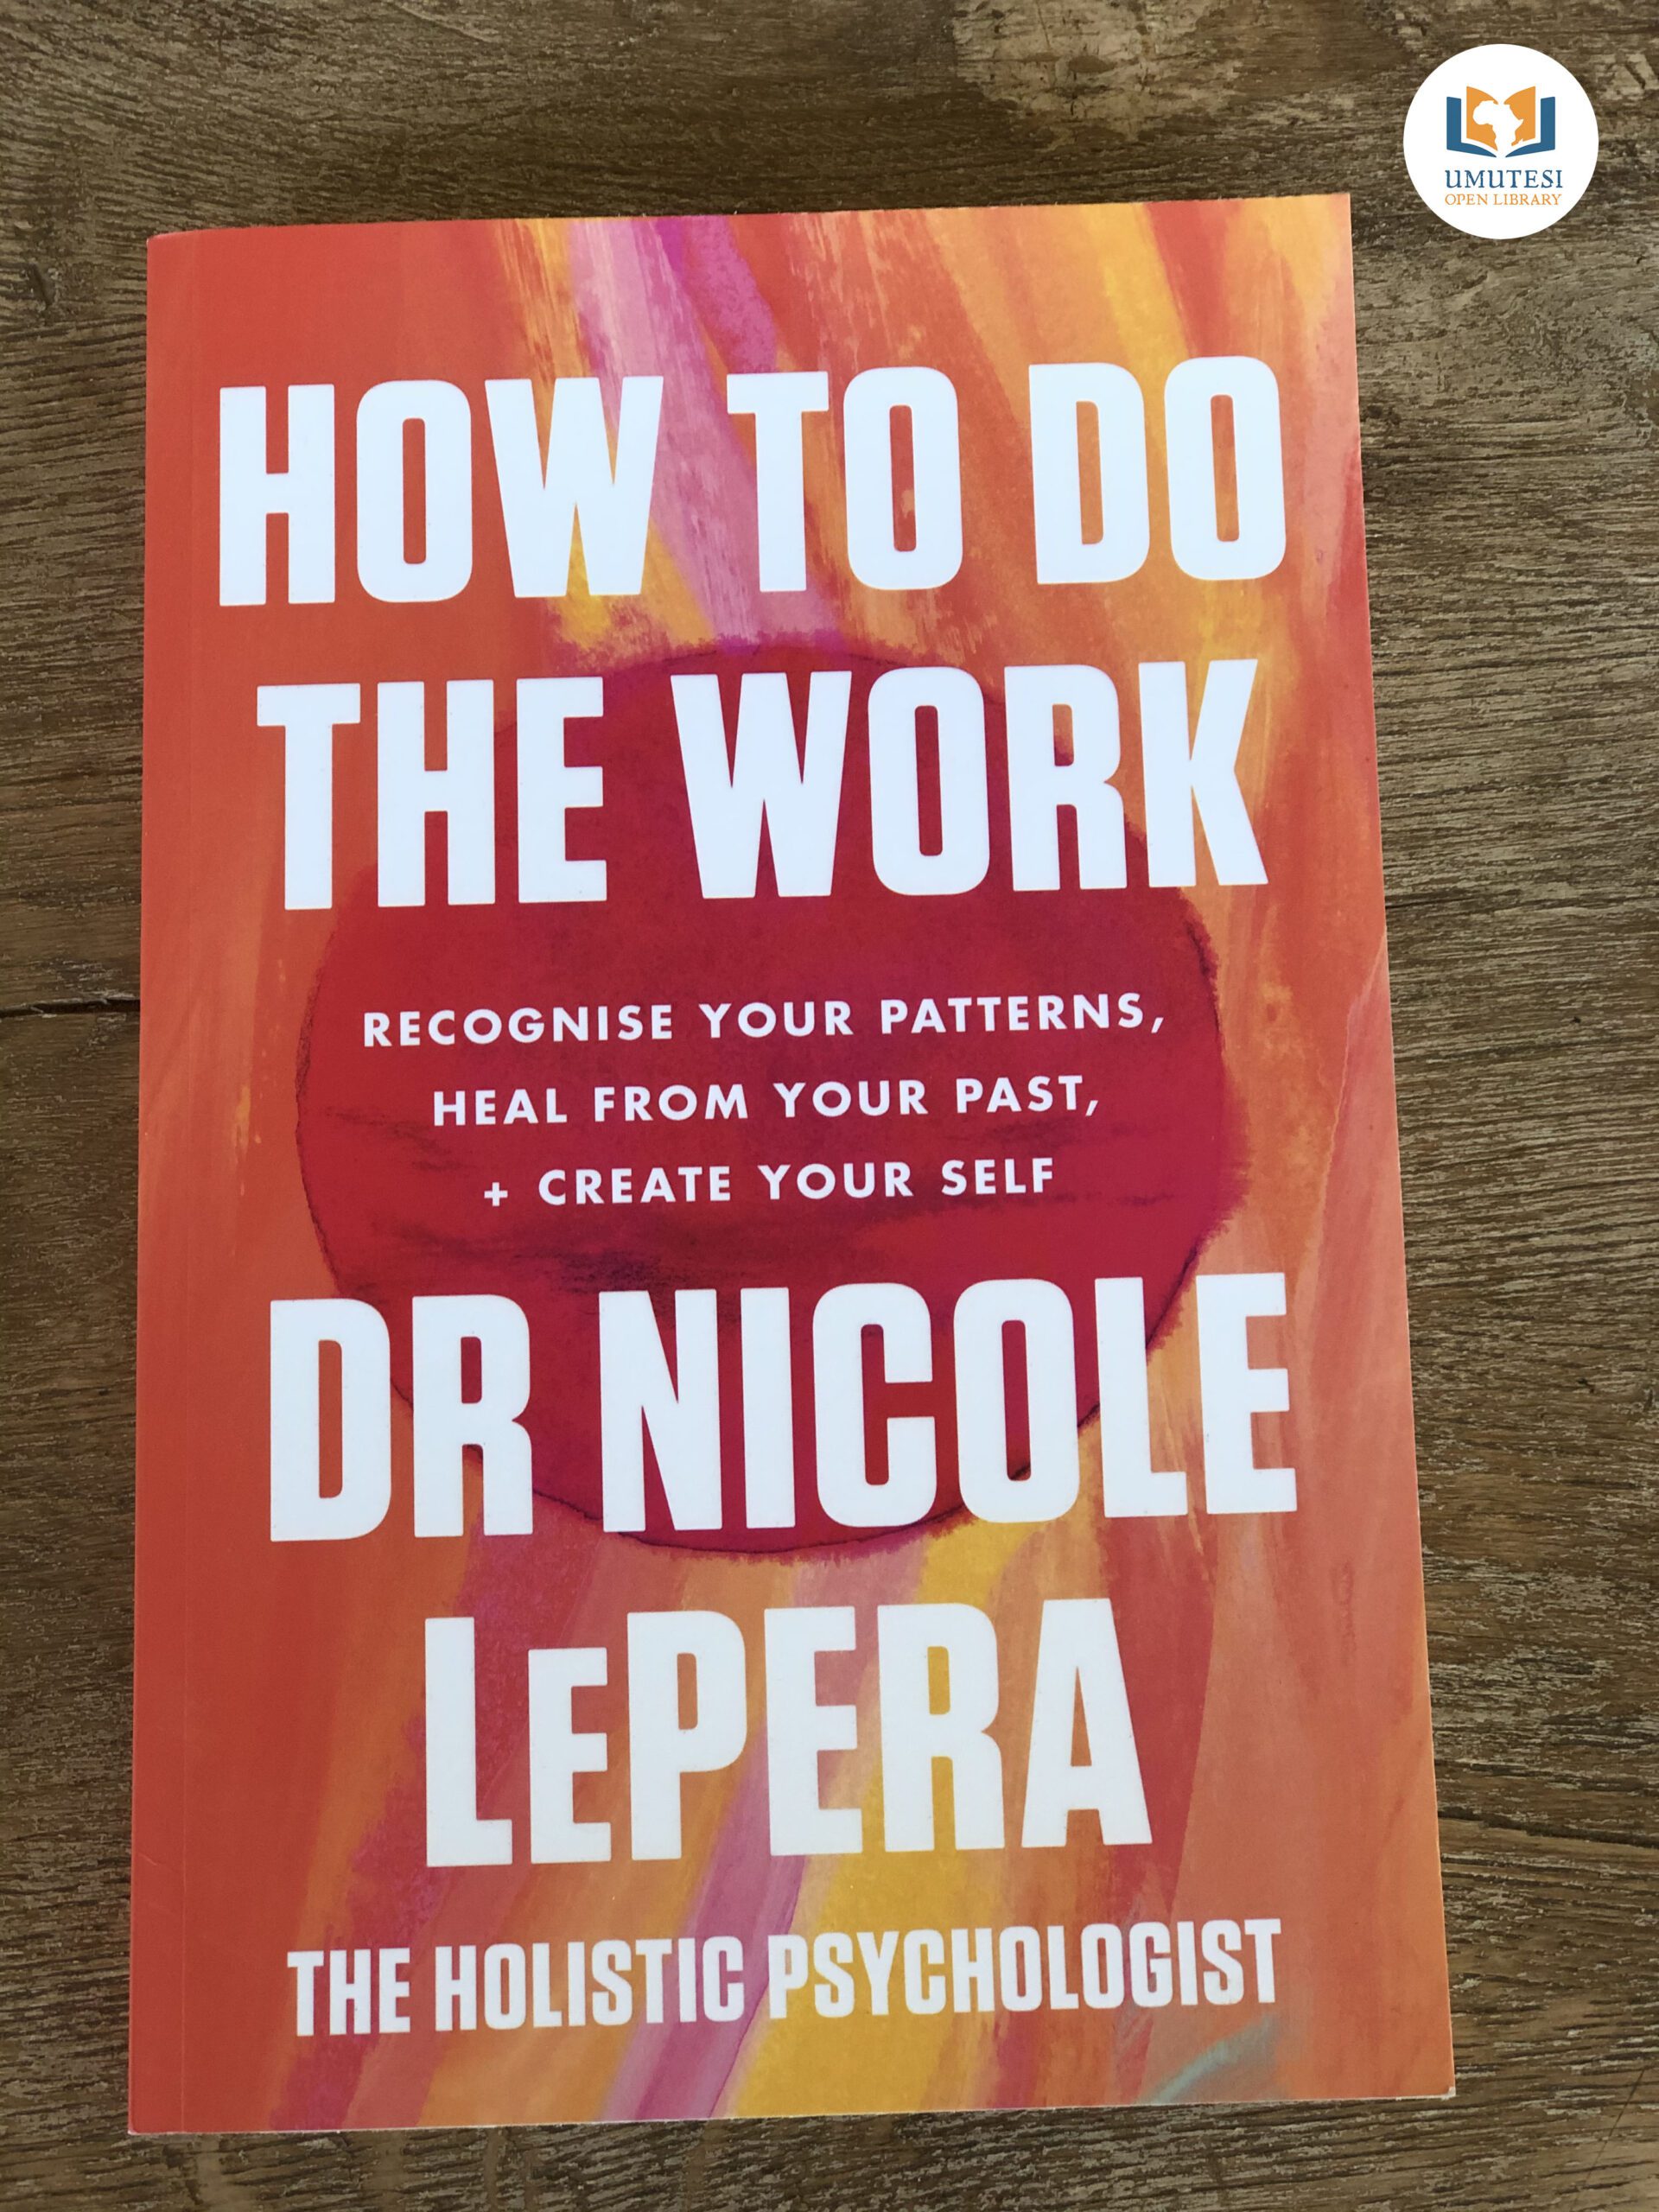 How to do the Work by Dr. Nicole Lepera